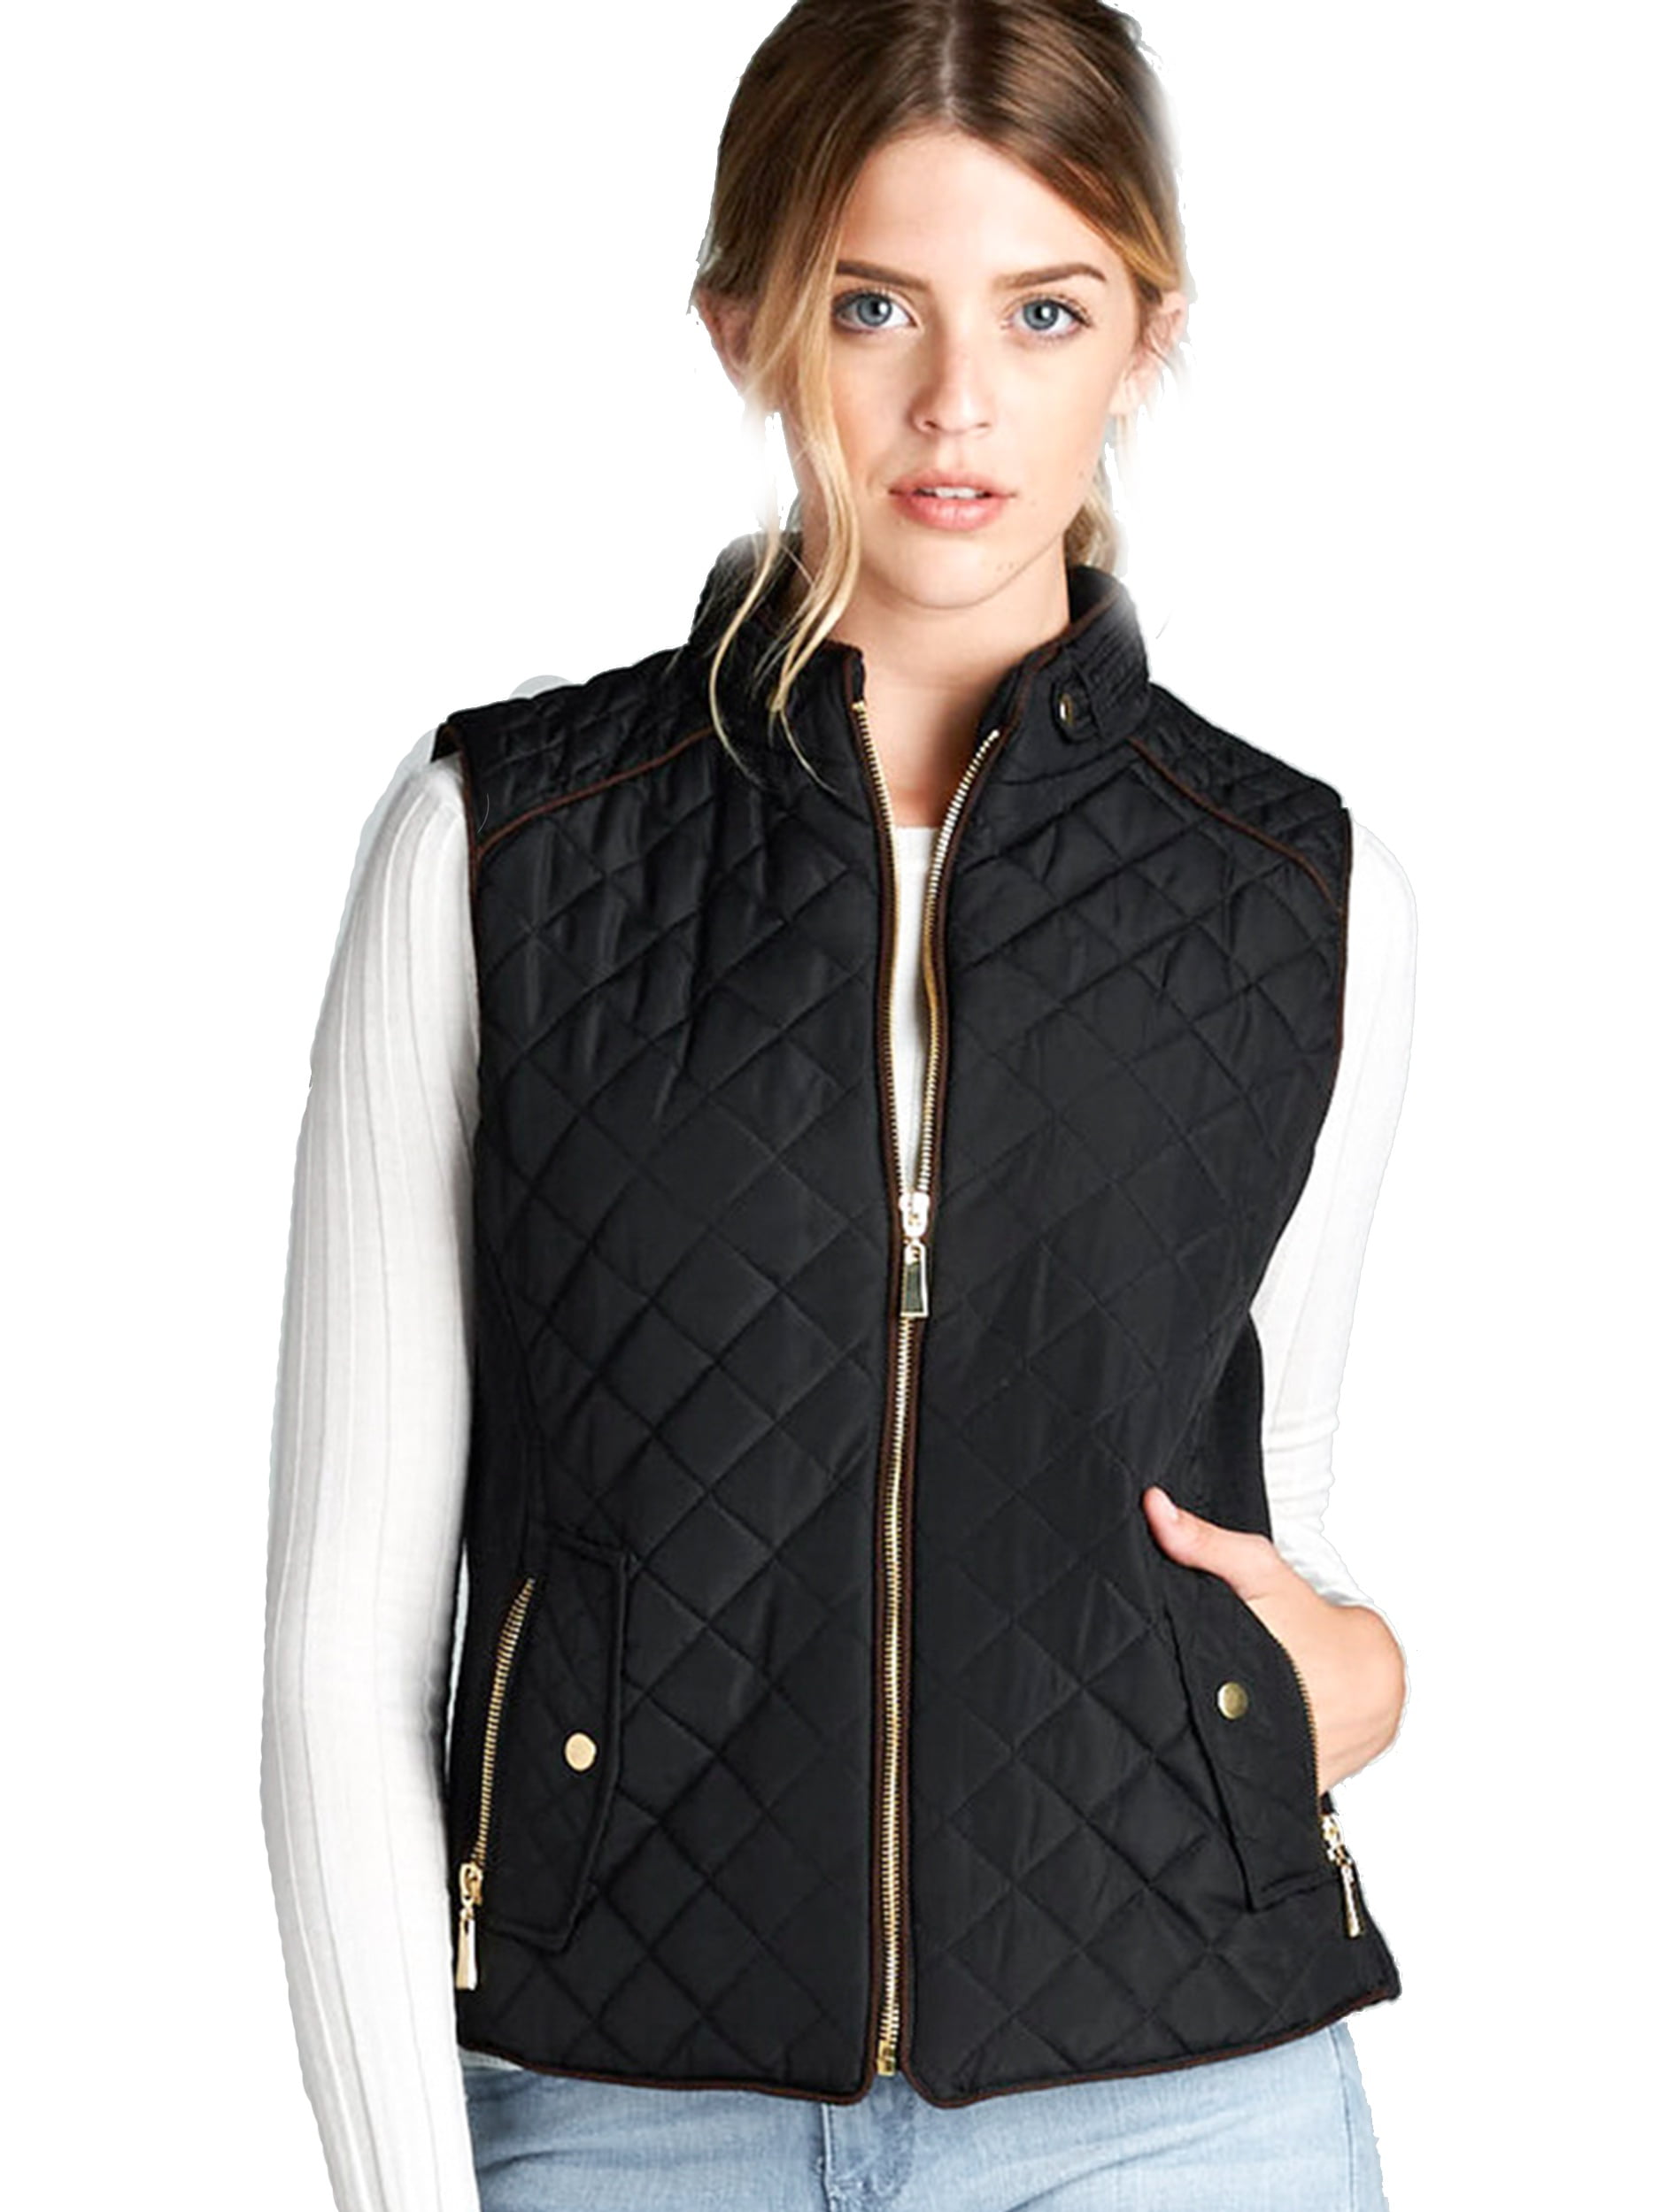 Women's Lightweight Quilted Padding Zip Up Jacket Vest-Plus Size ...